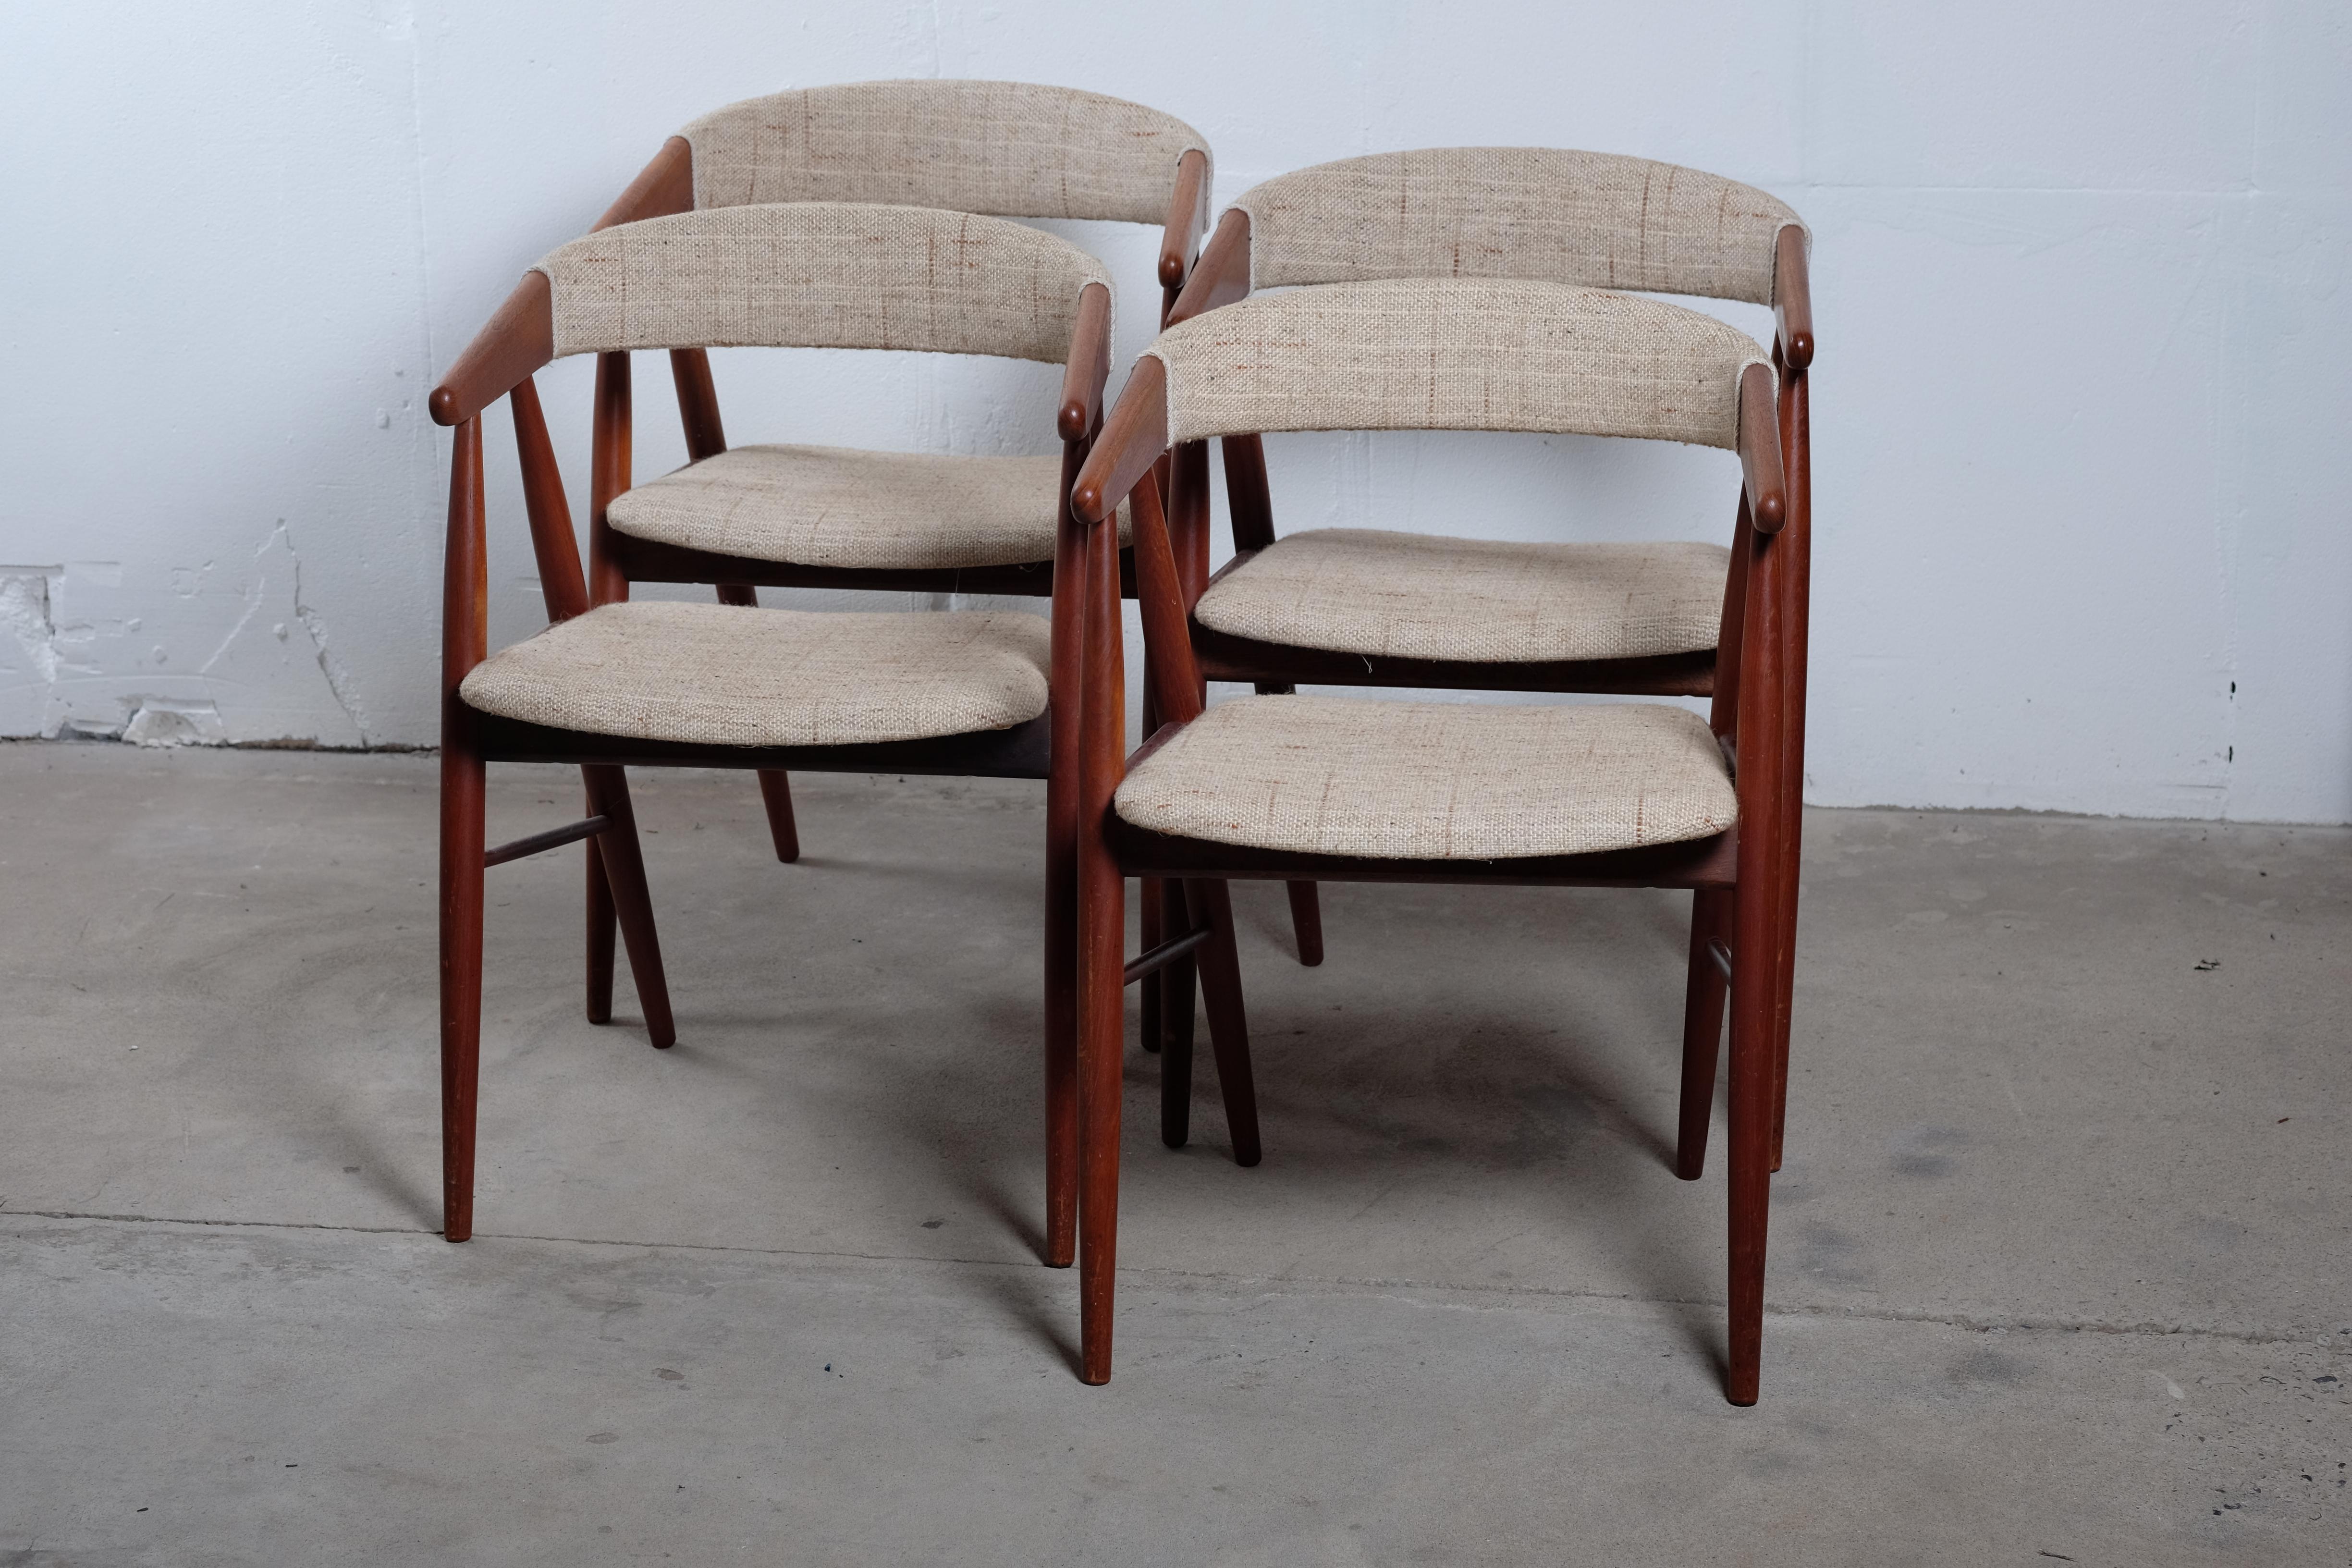 Set of four Danish armchairs from the 1960s. The chairs are attributed to Kai
Kristiansen, but I have not been able to find anything proving it's his design.
No matter who has designed it, it's a great chair! The chair has a light and elegant